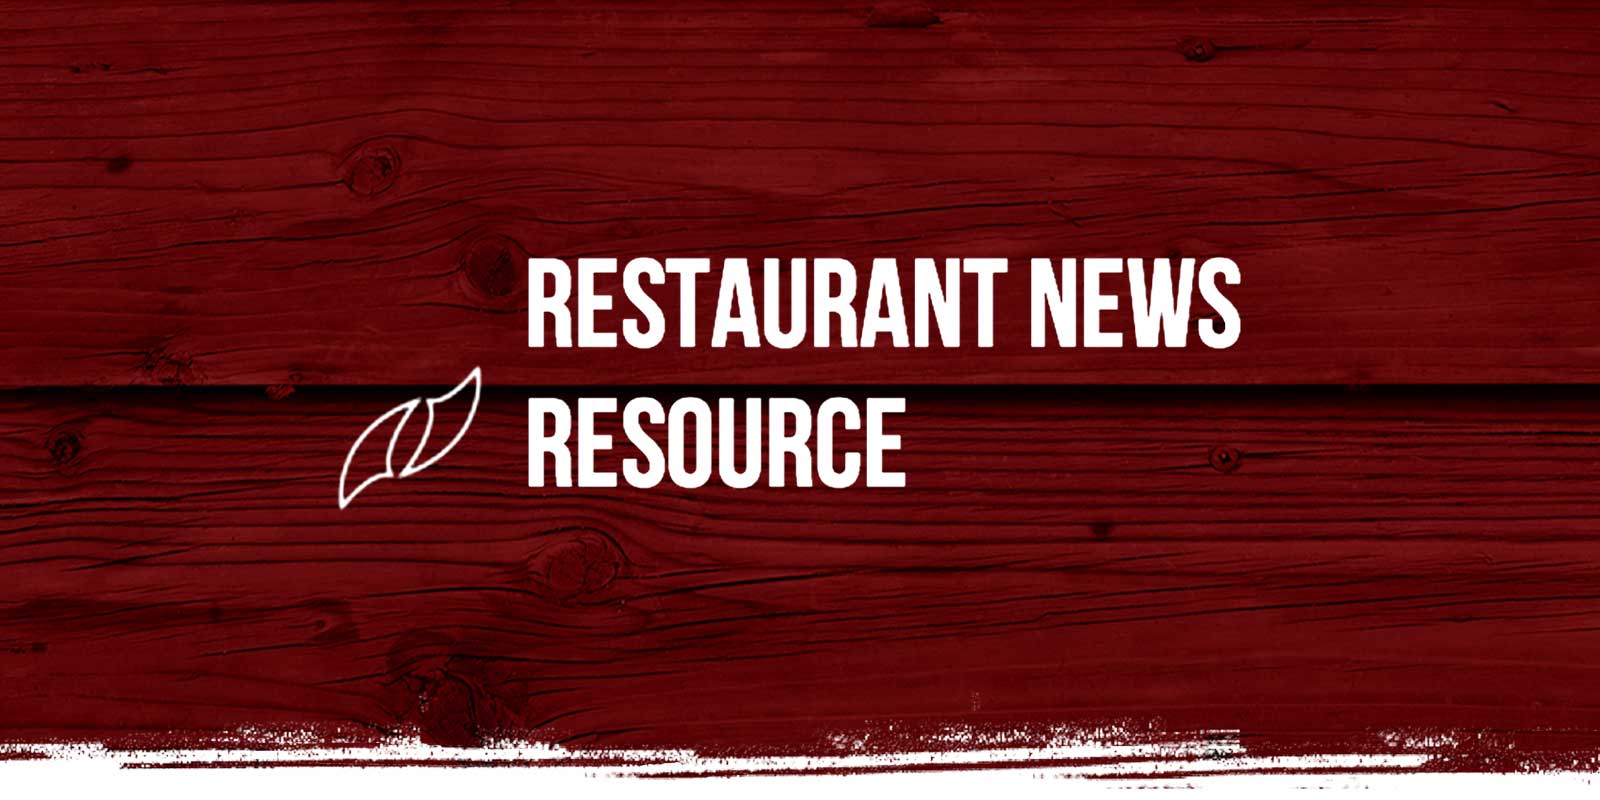 Restaurant News logo on red weathered wood background